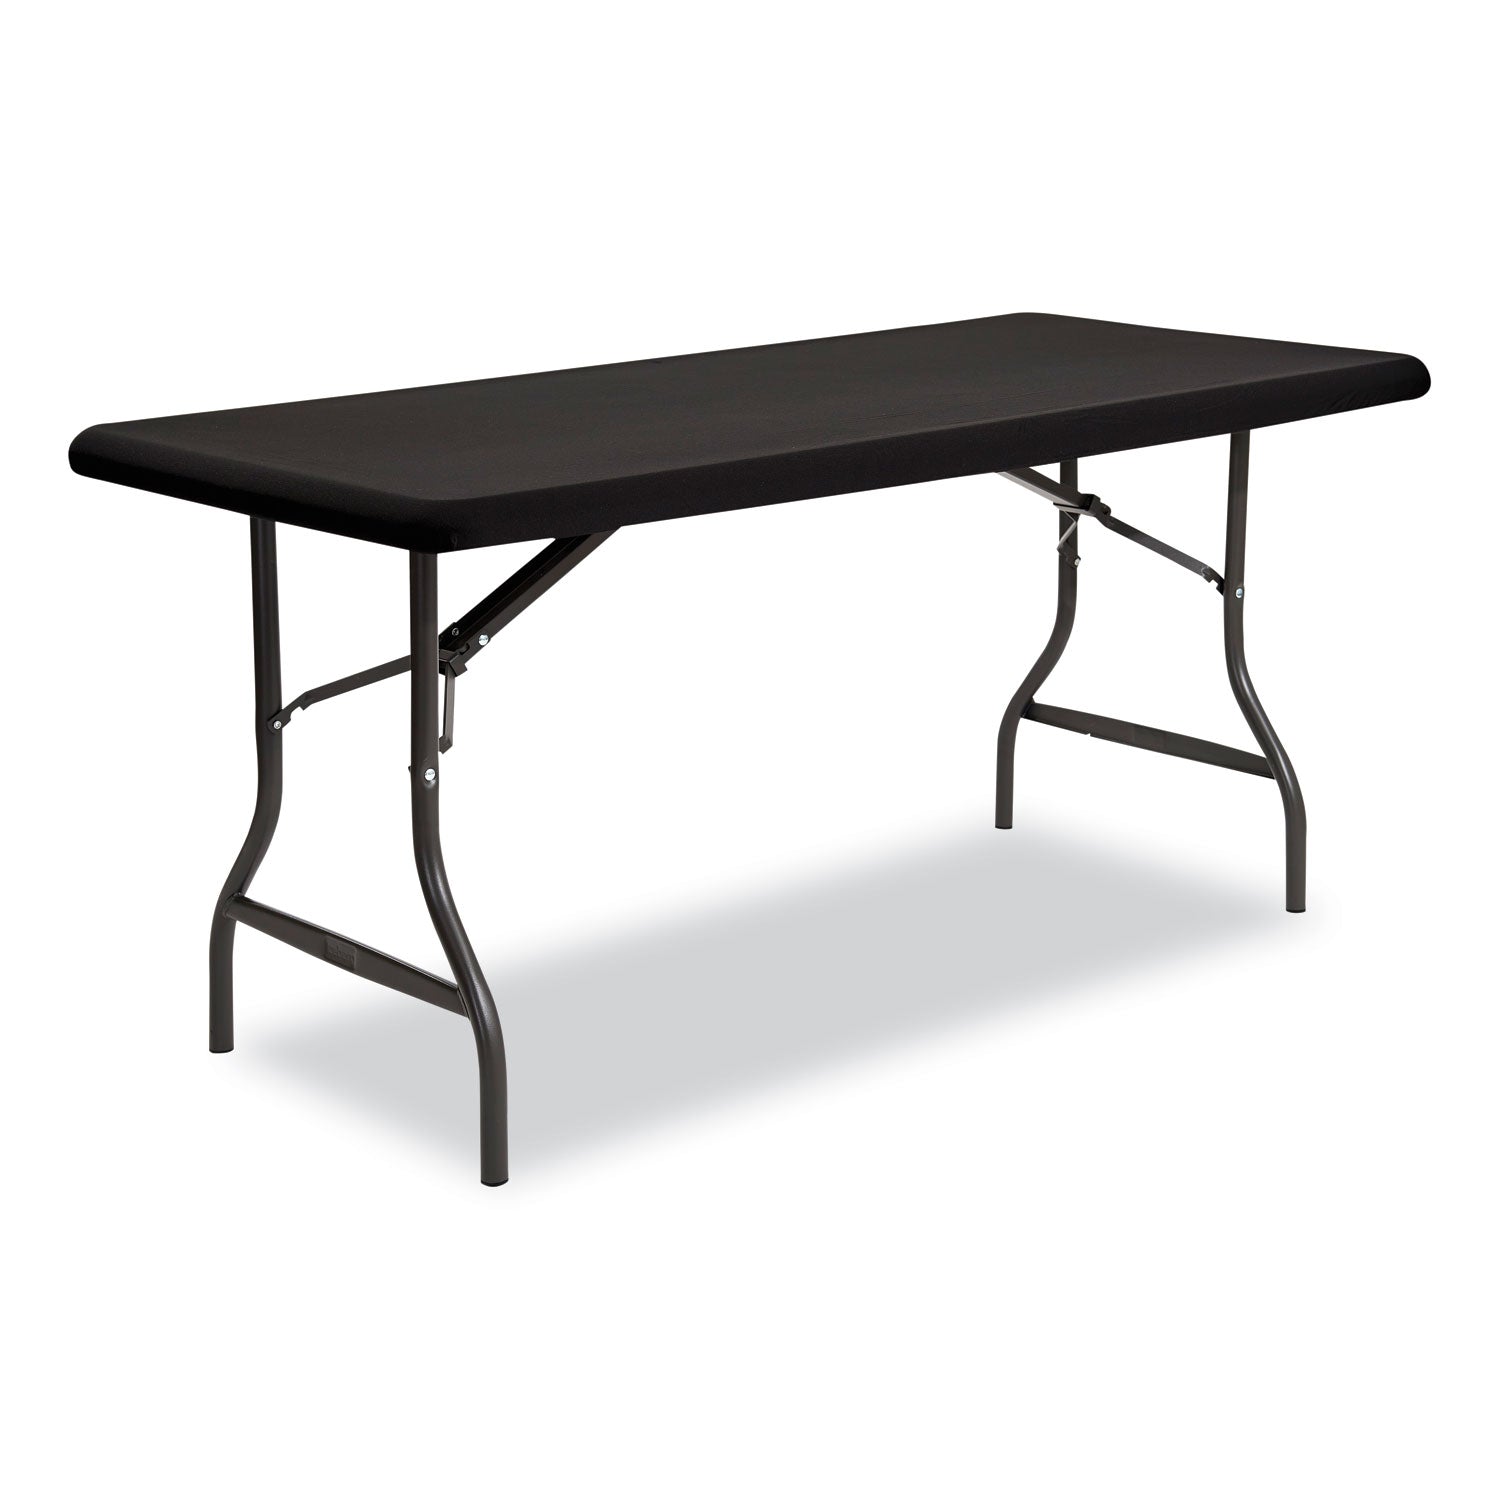 igear-fabric-table-top-cap-cover-polyester-30-x-96-black_ice16631 - 5